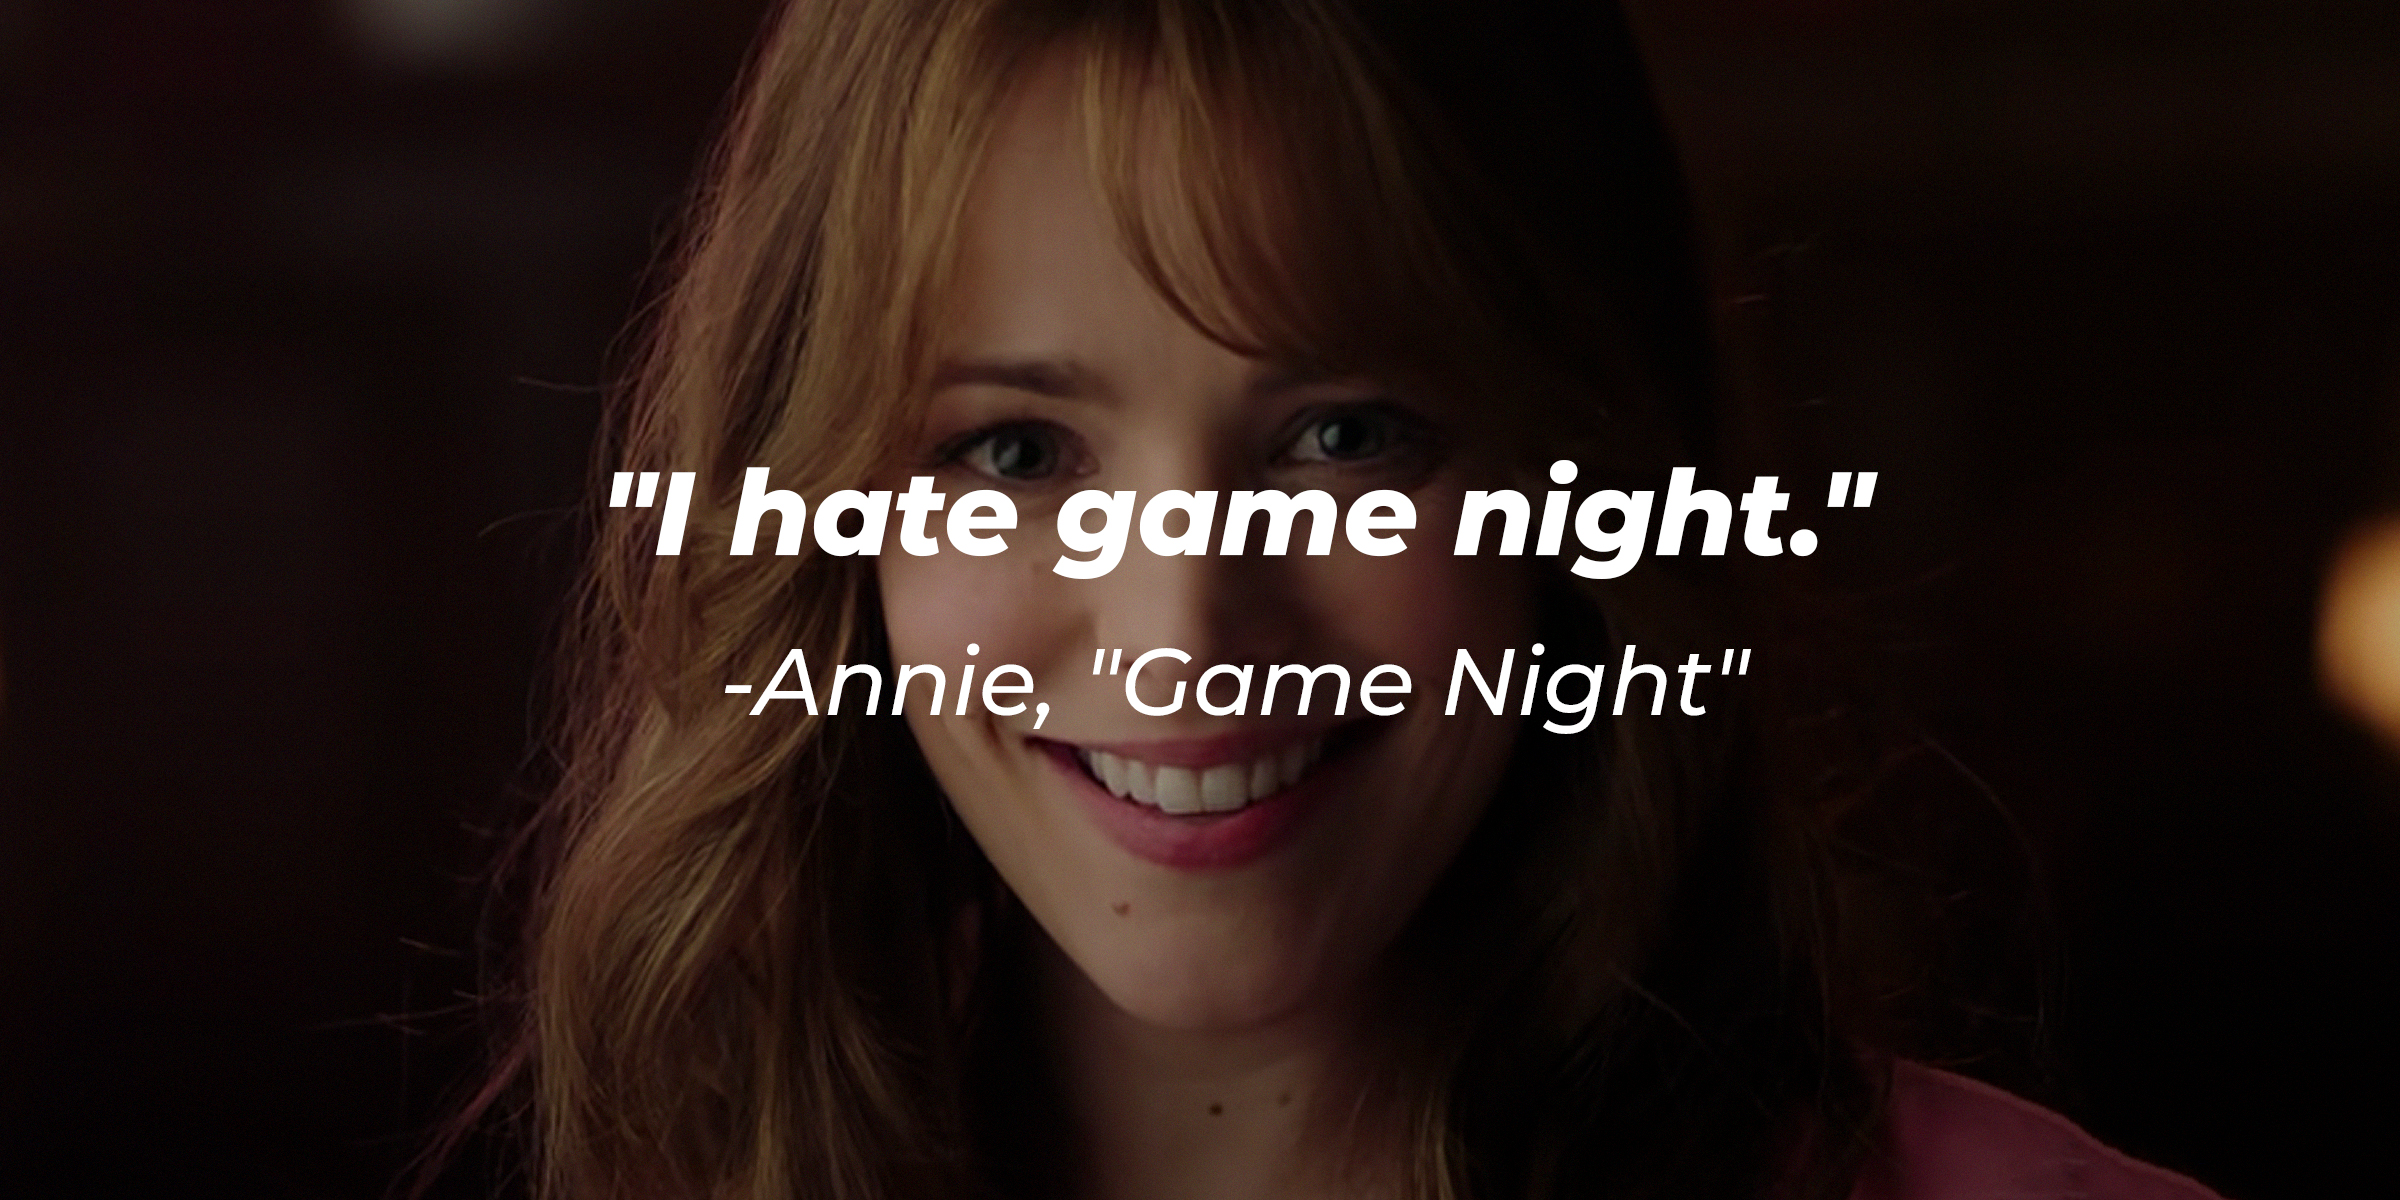 Annie's quote from "Game Night": "I hate game night." | Source: youtube.com/WarnerBrosPictures